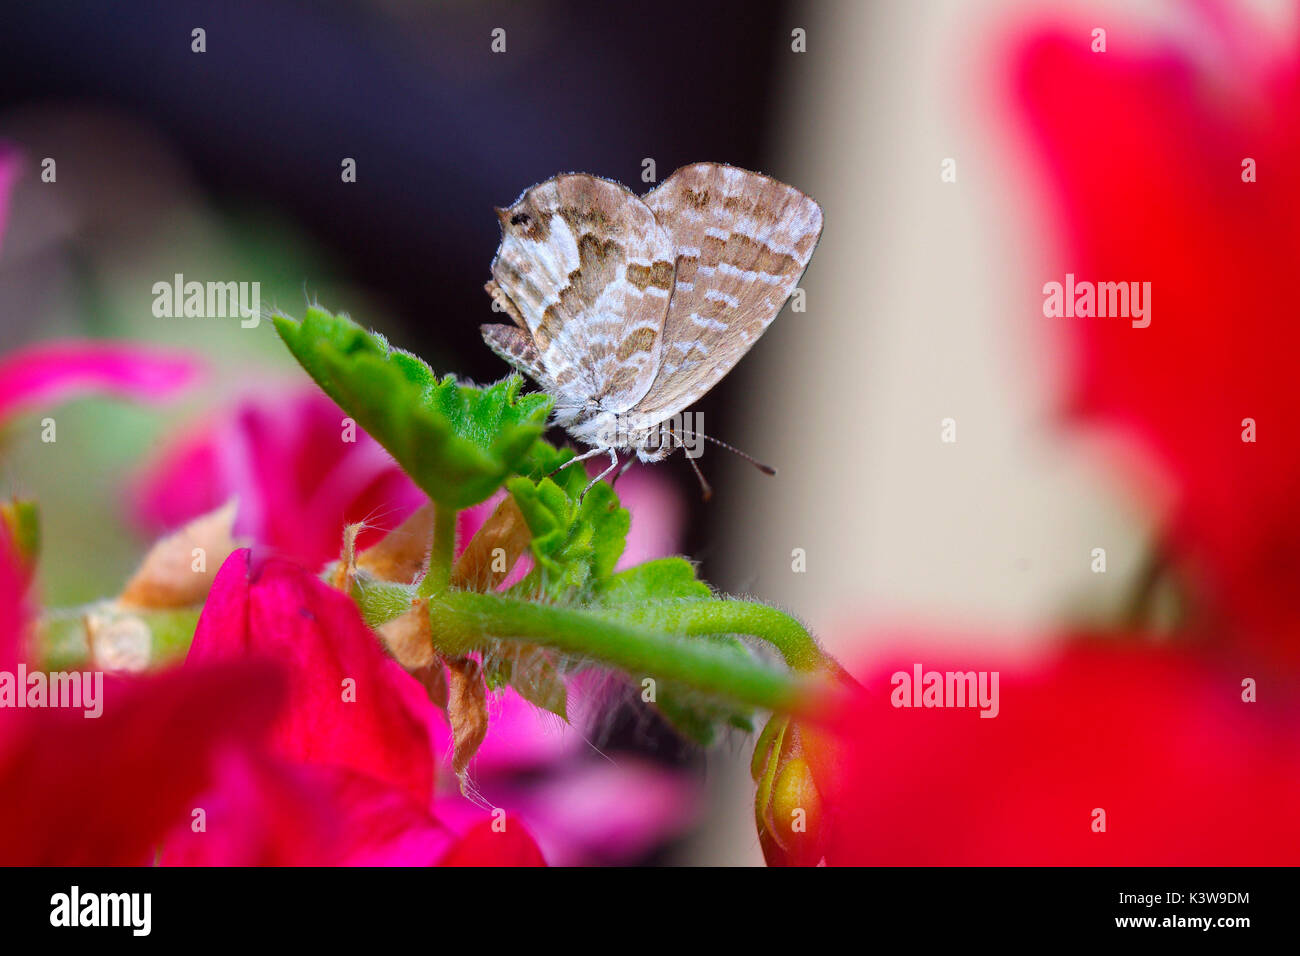 Cacyreus marshalli, alien species of butterfly that comes from Africa, on a leaf geranium Stock Photo